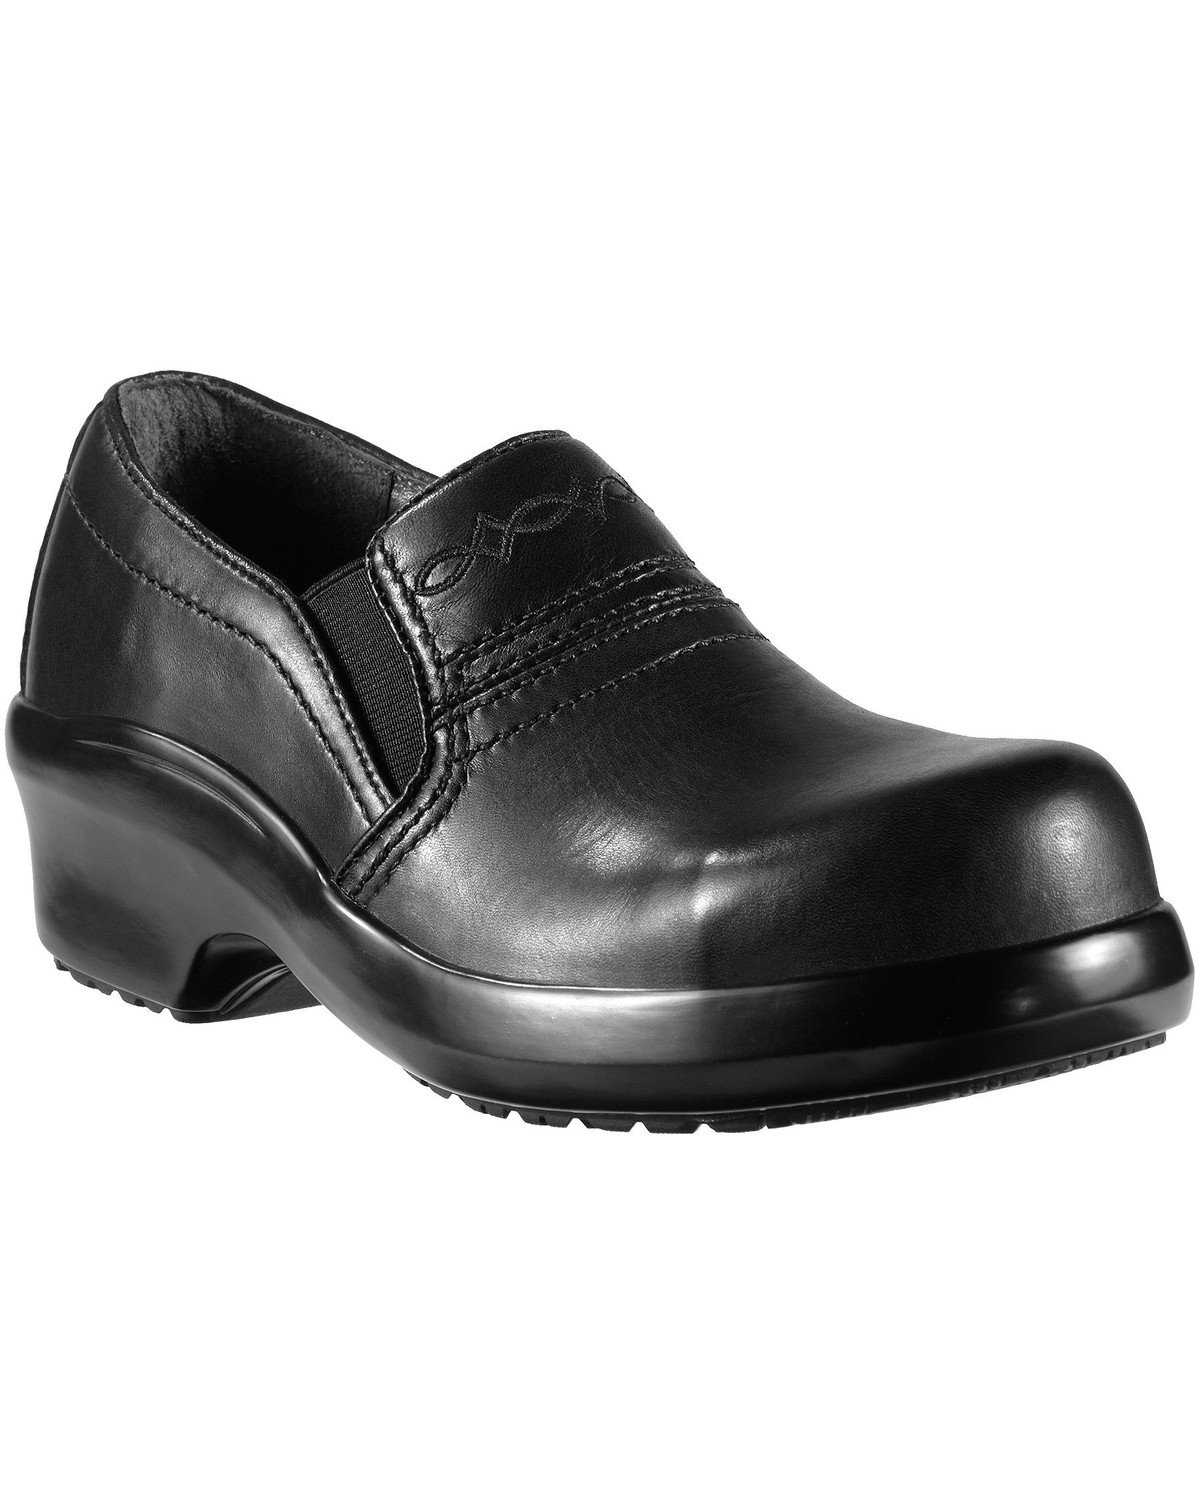 Ariat Expert Safety Clog Slip-On Shoes 